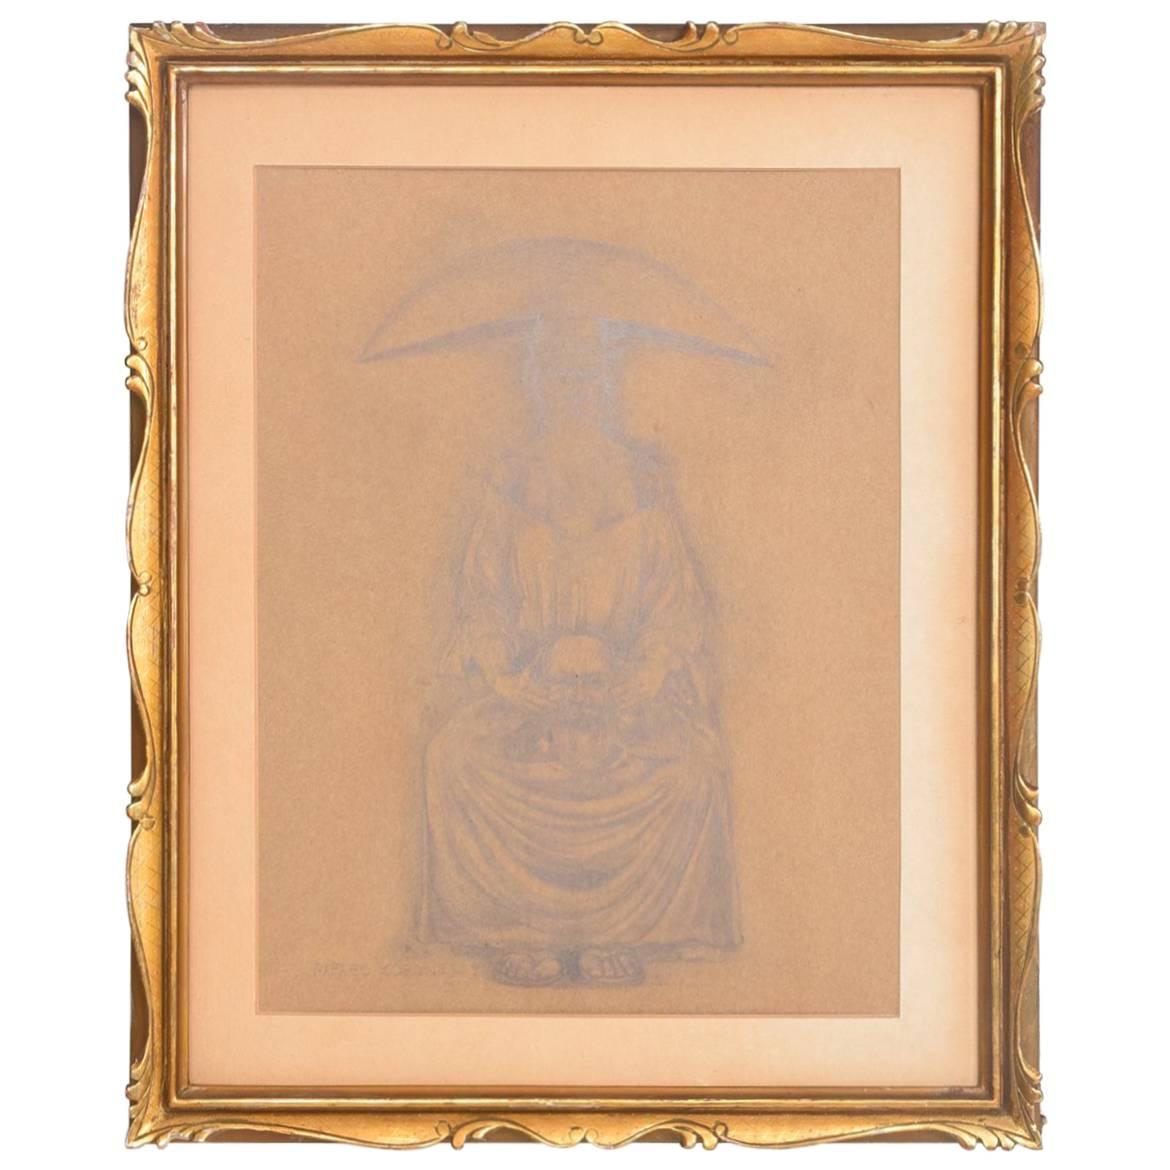 Rafael Coronel Drawing Pencil on Paper, Mounted Giltwood Frame